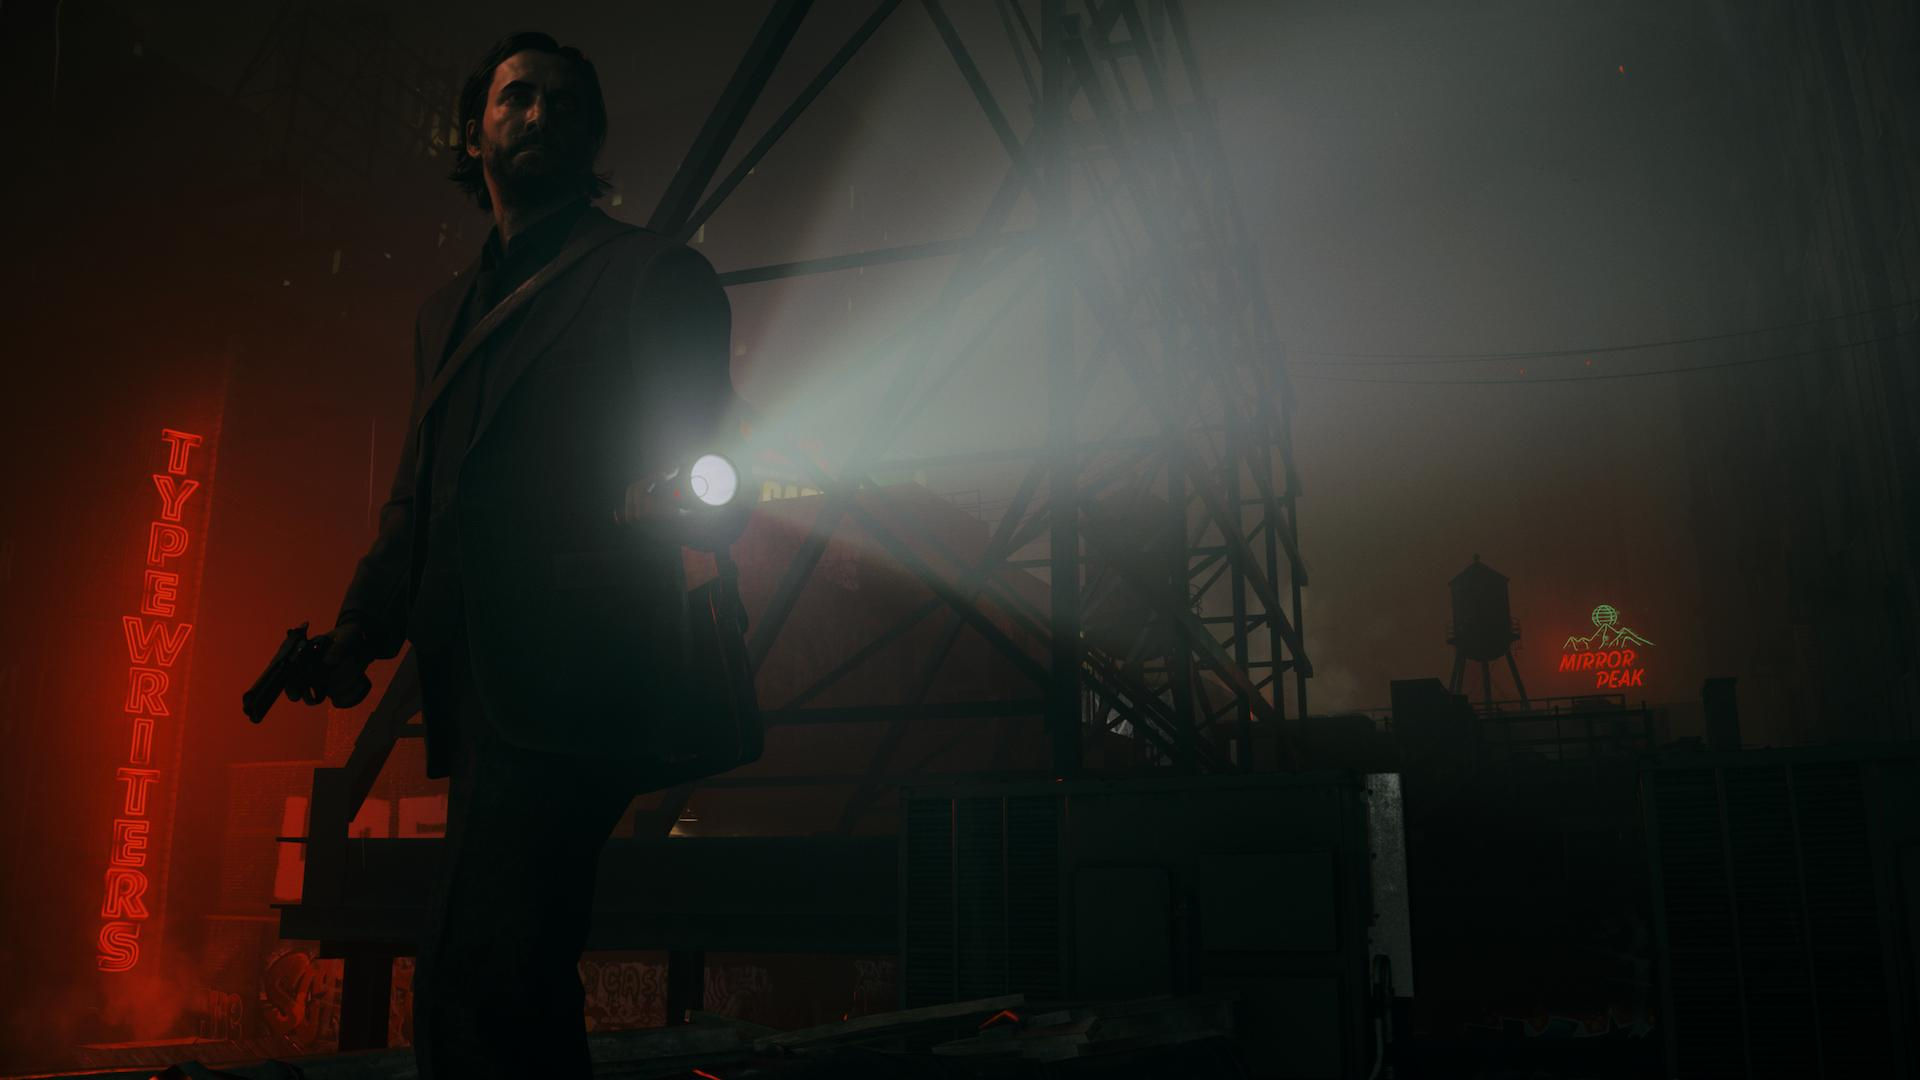 Alan Wake 2' will be Remedy's first survival horror game